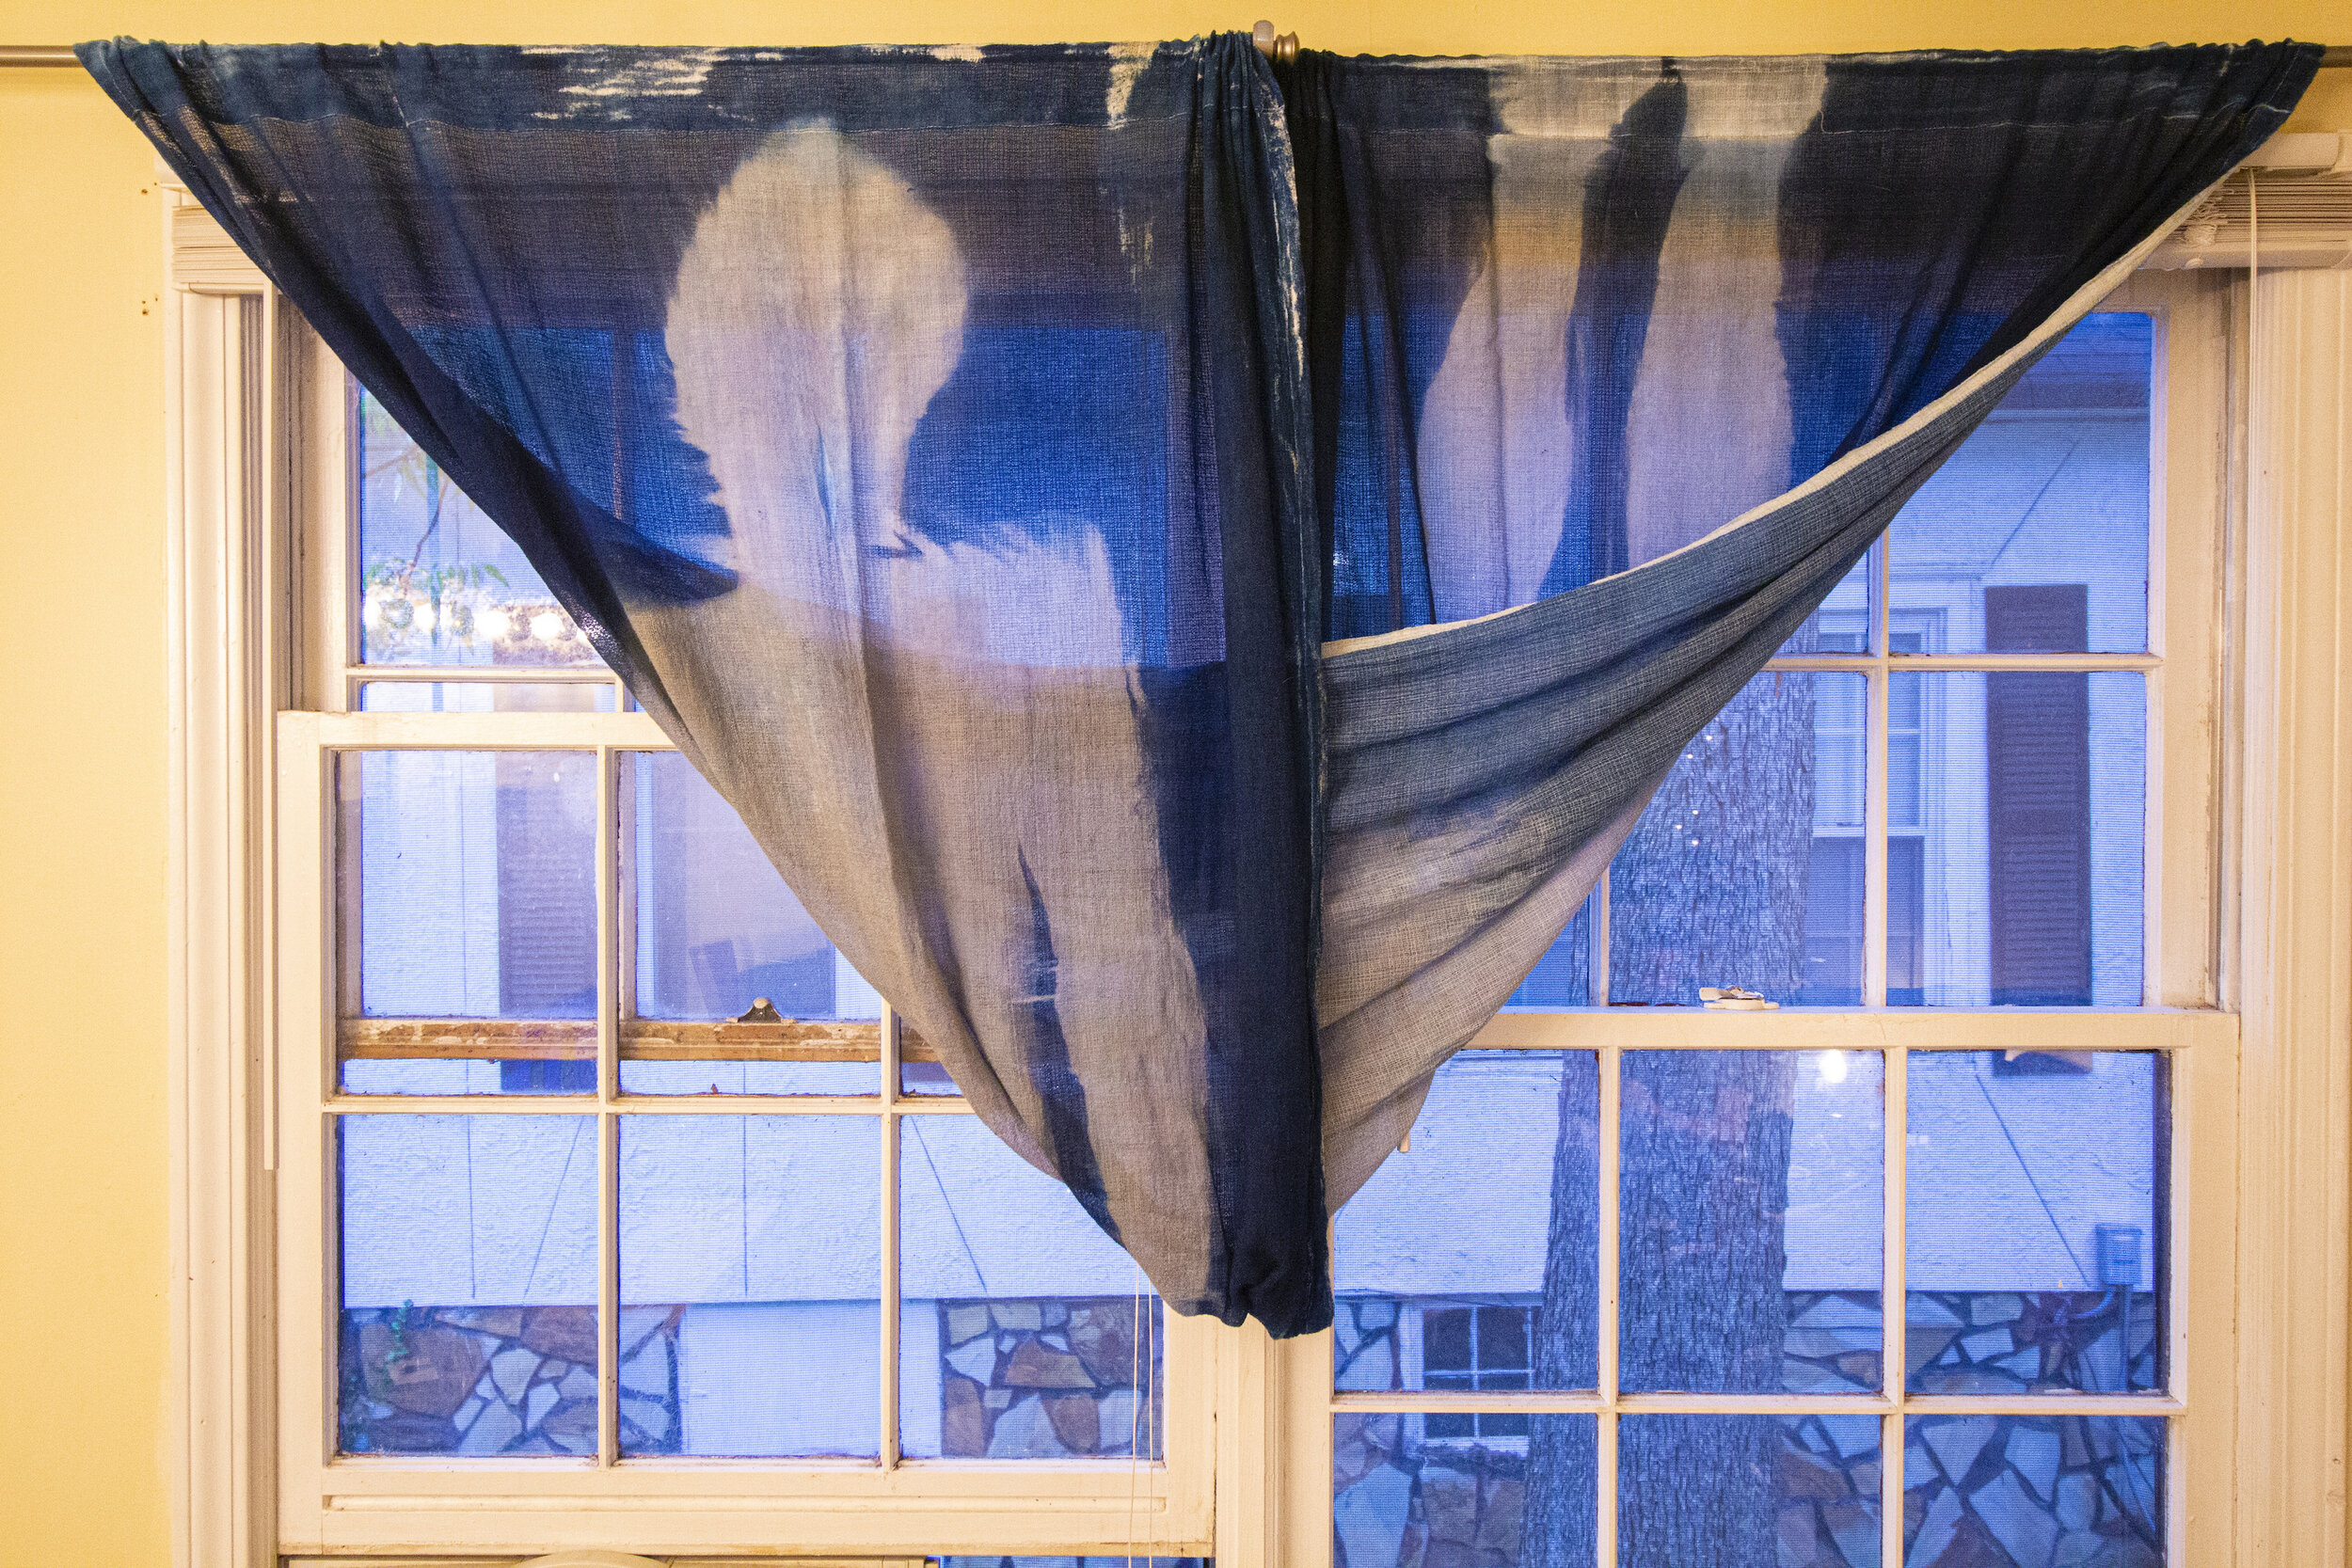 Full Twist [early evening], 2020, cotton curtain, cyanotype solution, curtain rod, and hardware, 110 x 42 inches